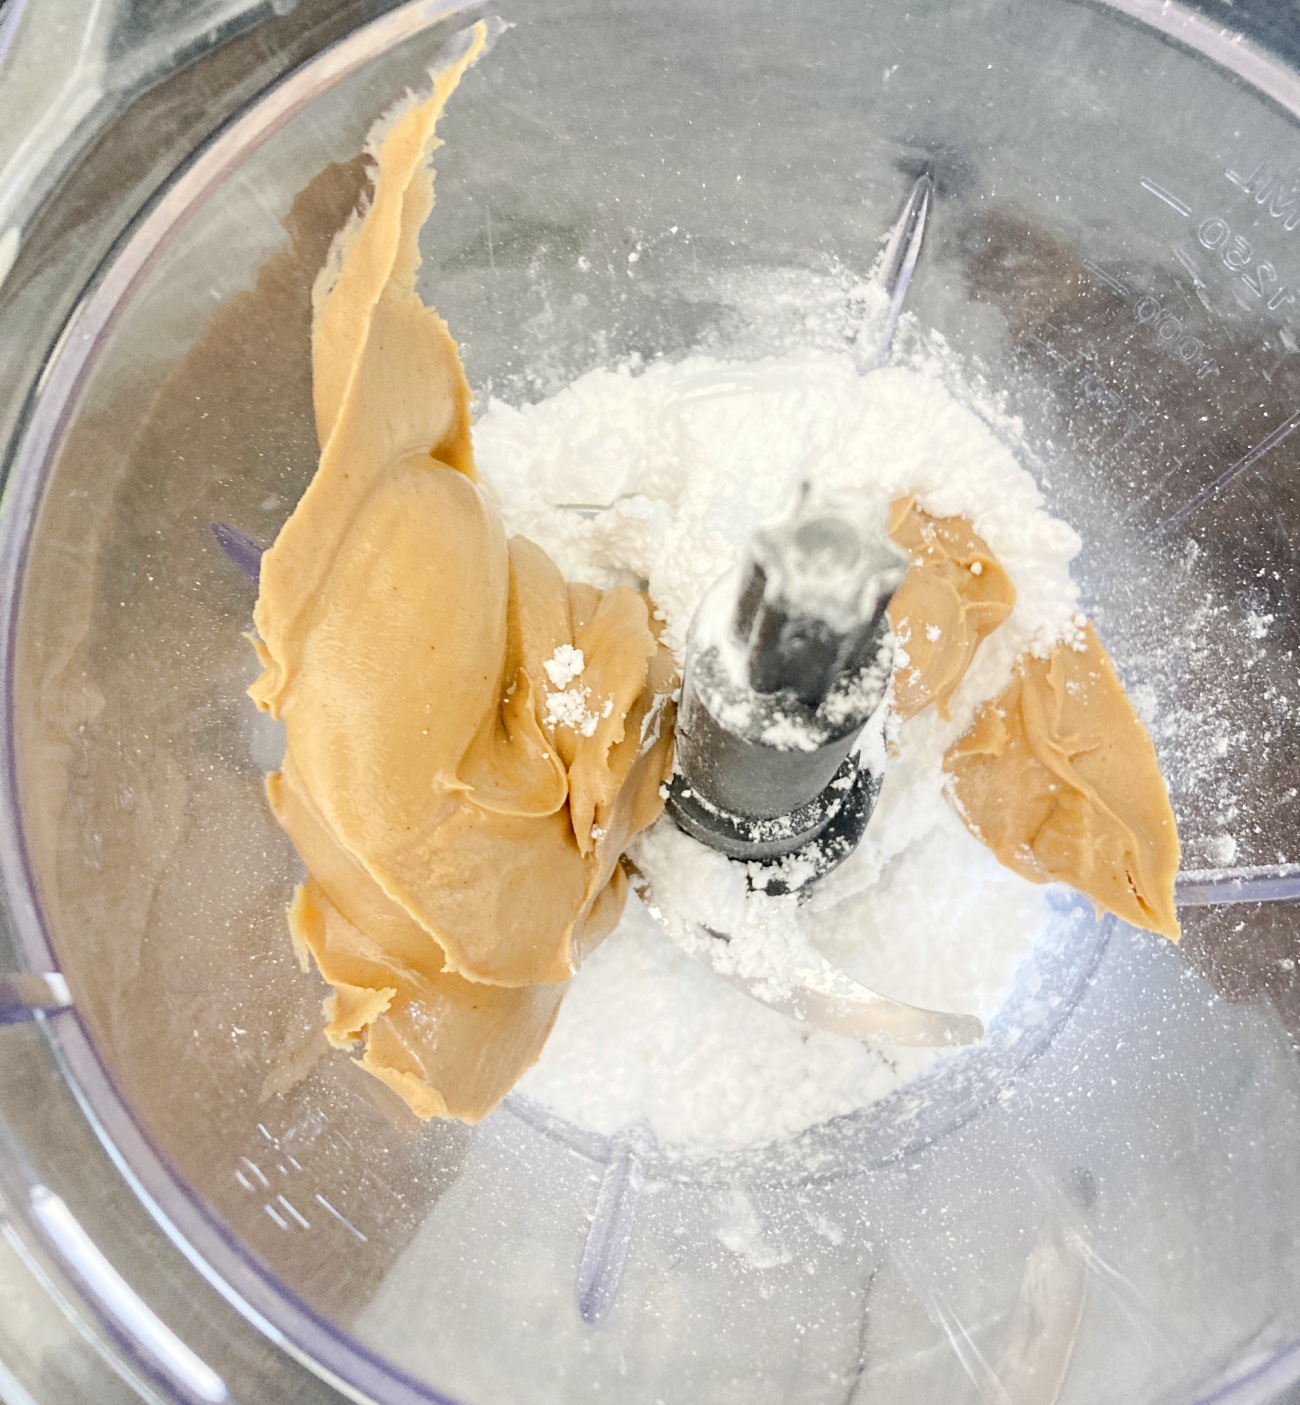 Combine crumble ingredients together in food processor until sandy mixture forms. Press half the mixture into a 9